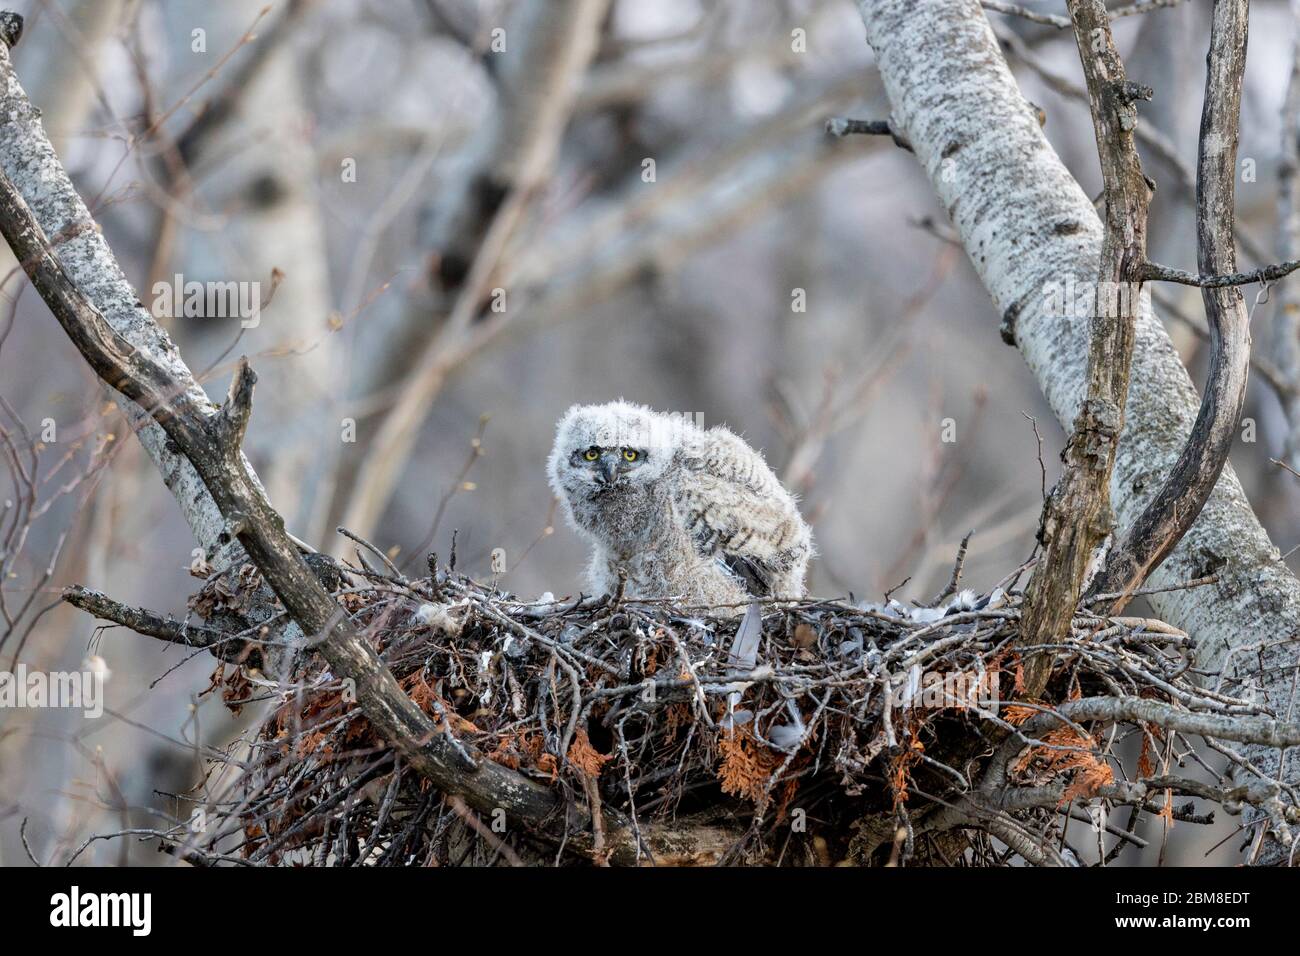 A wild nestling Great Horned Owlet (Bubo Virginianus), part of the Strigiformes order, and Strigidae family, sits in a stick nest. Stock Photo